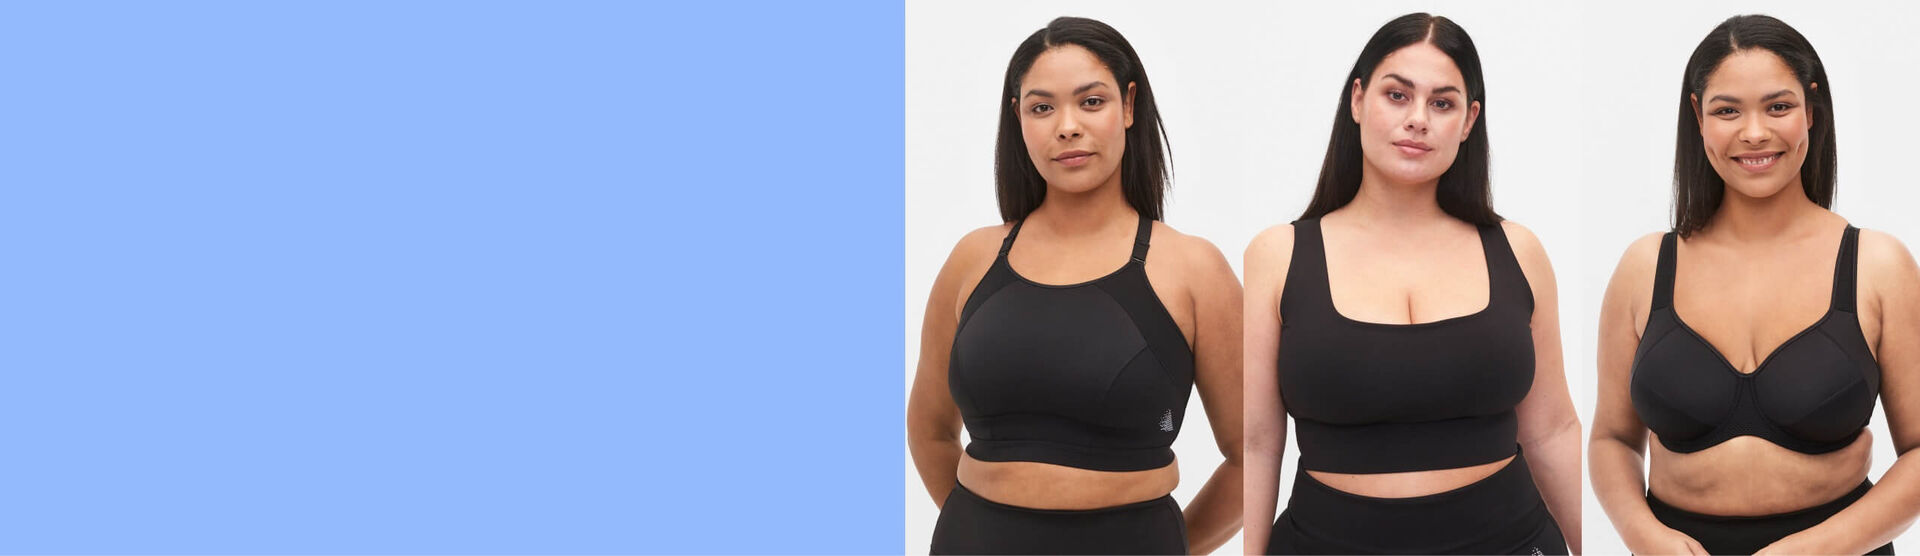 Best Sports Bra Ever Large Cup Sizes  Supportive Sports Bra Large Bust -  Bra Woman - Aliexpress